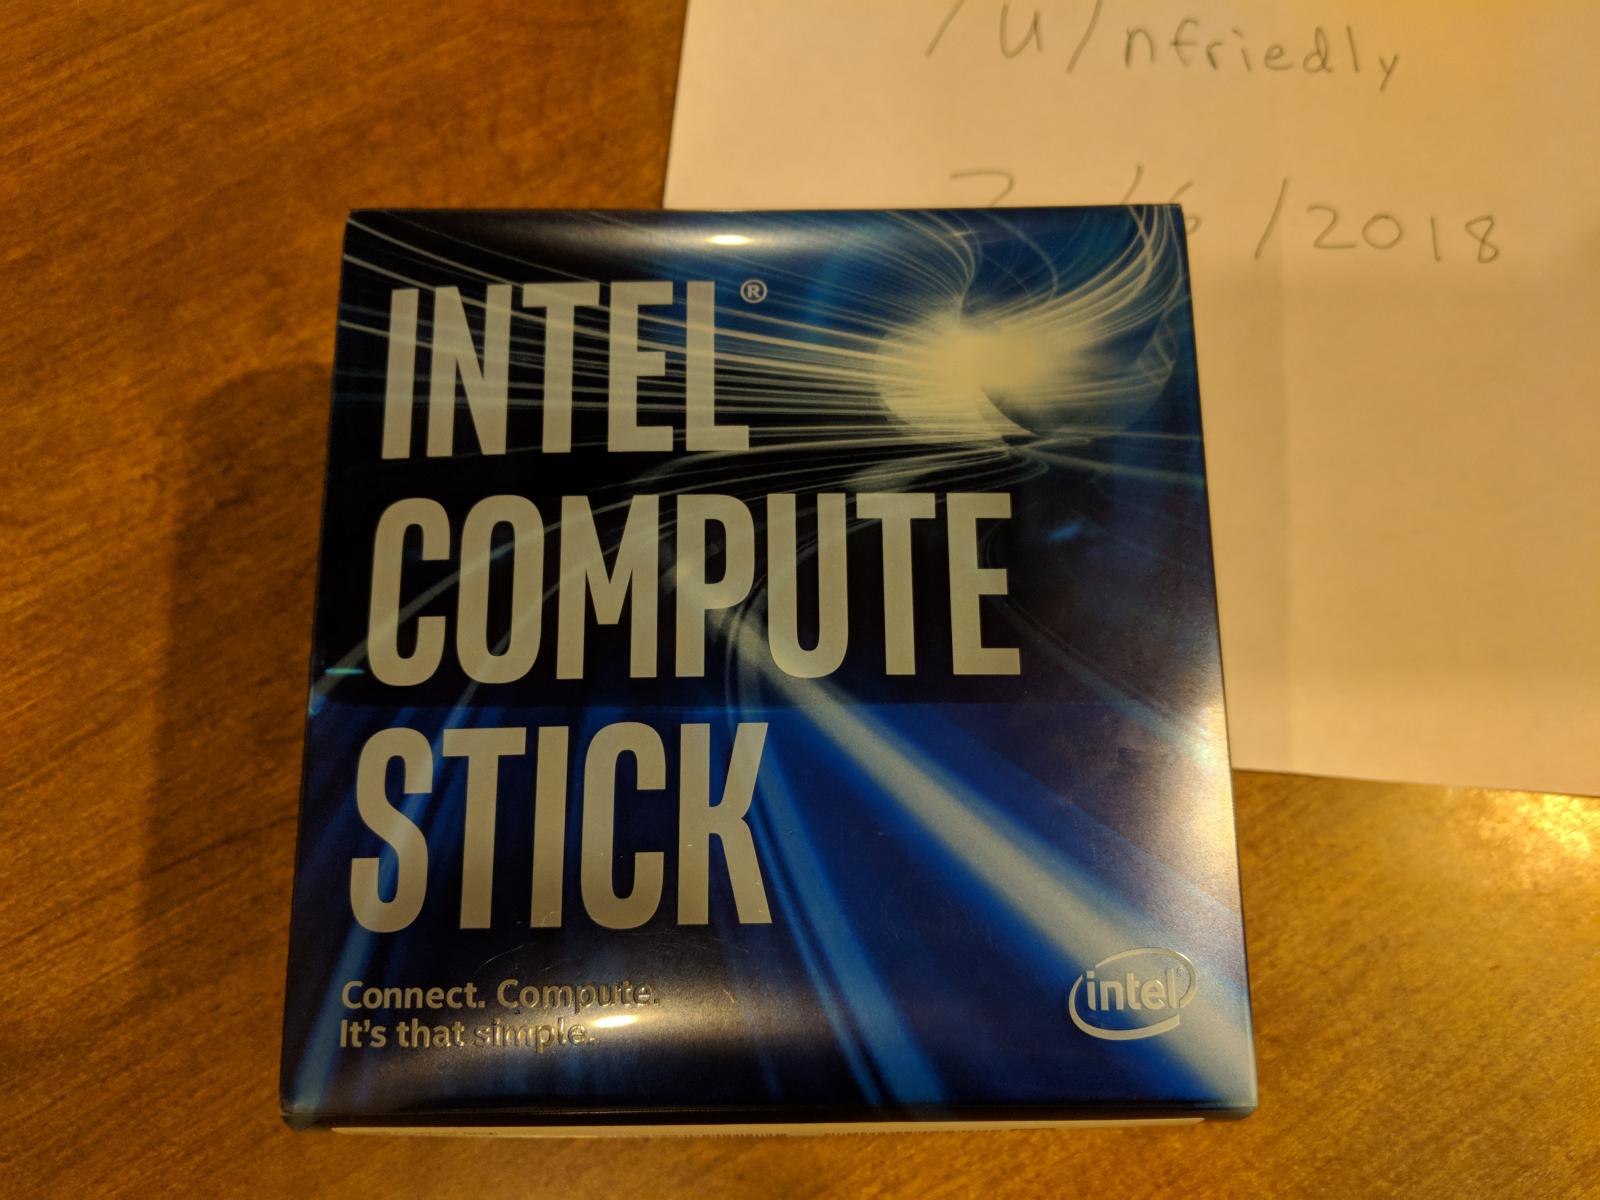 For sale Intel Compute Stick - Core m3-6Y30 up to 2.2Ghz, 4GB RAM, 64GB Flash, Windows 10